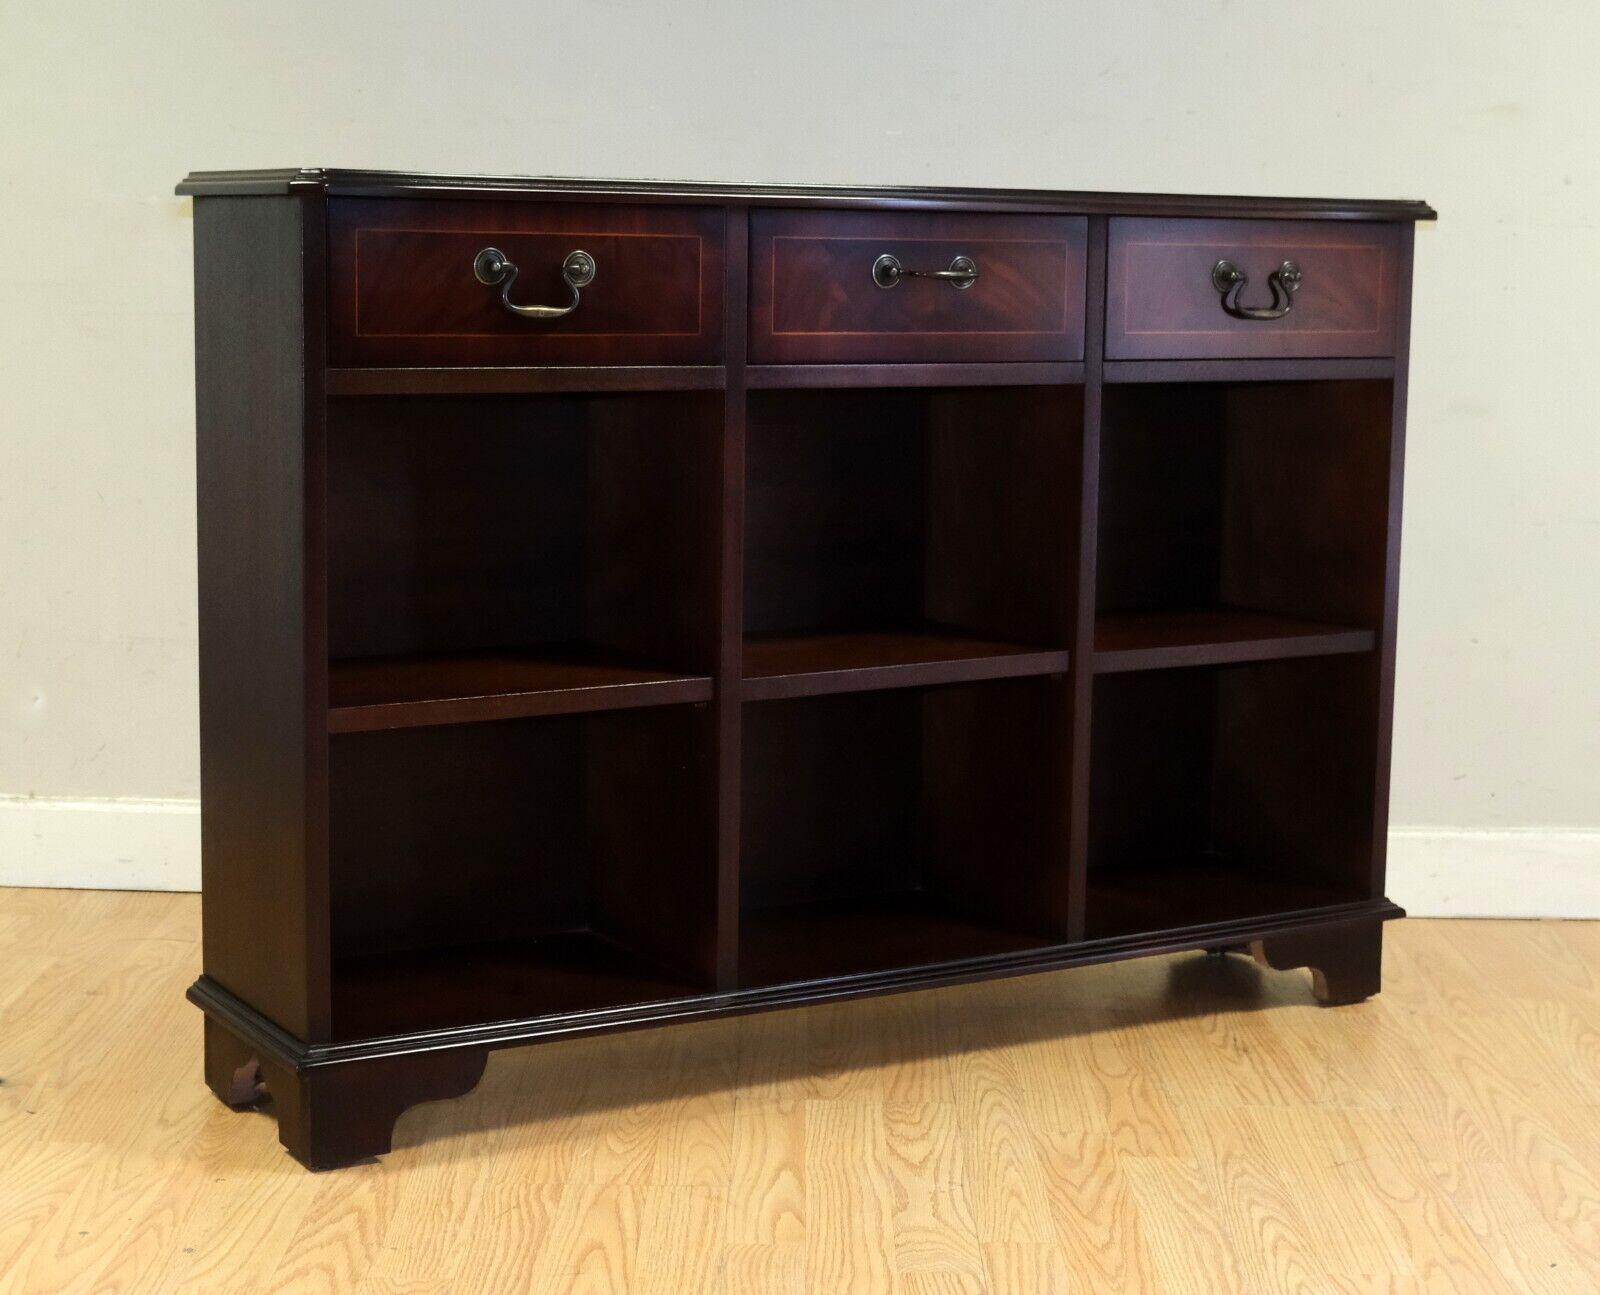 We are delighted to offer for sale this charming dark brown Mahogany low bookshelf sideboard with three drawers and shelves.

This well made and useful piece would add style to any room around your house and it is ideal for small spaces, as it does